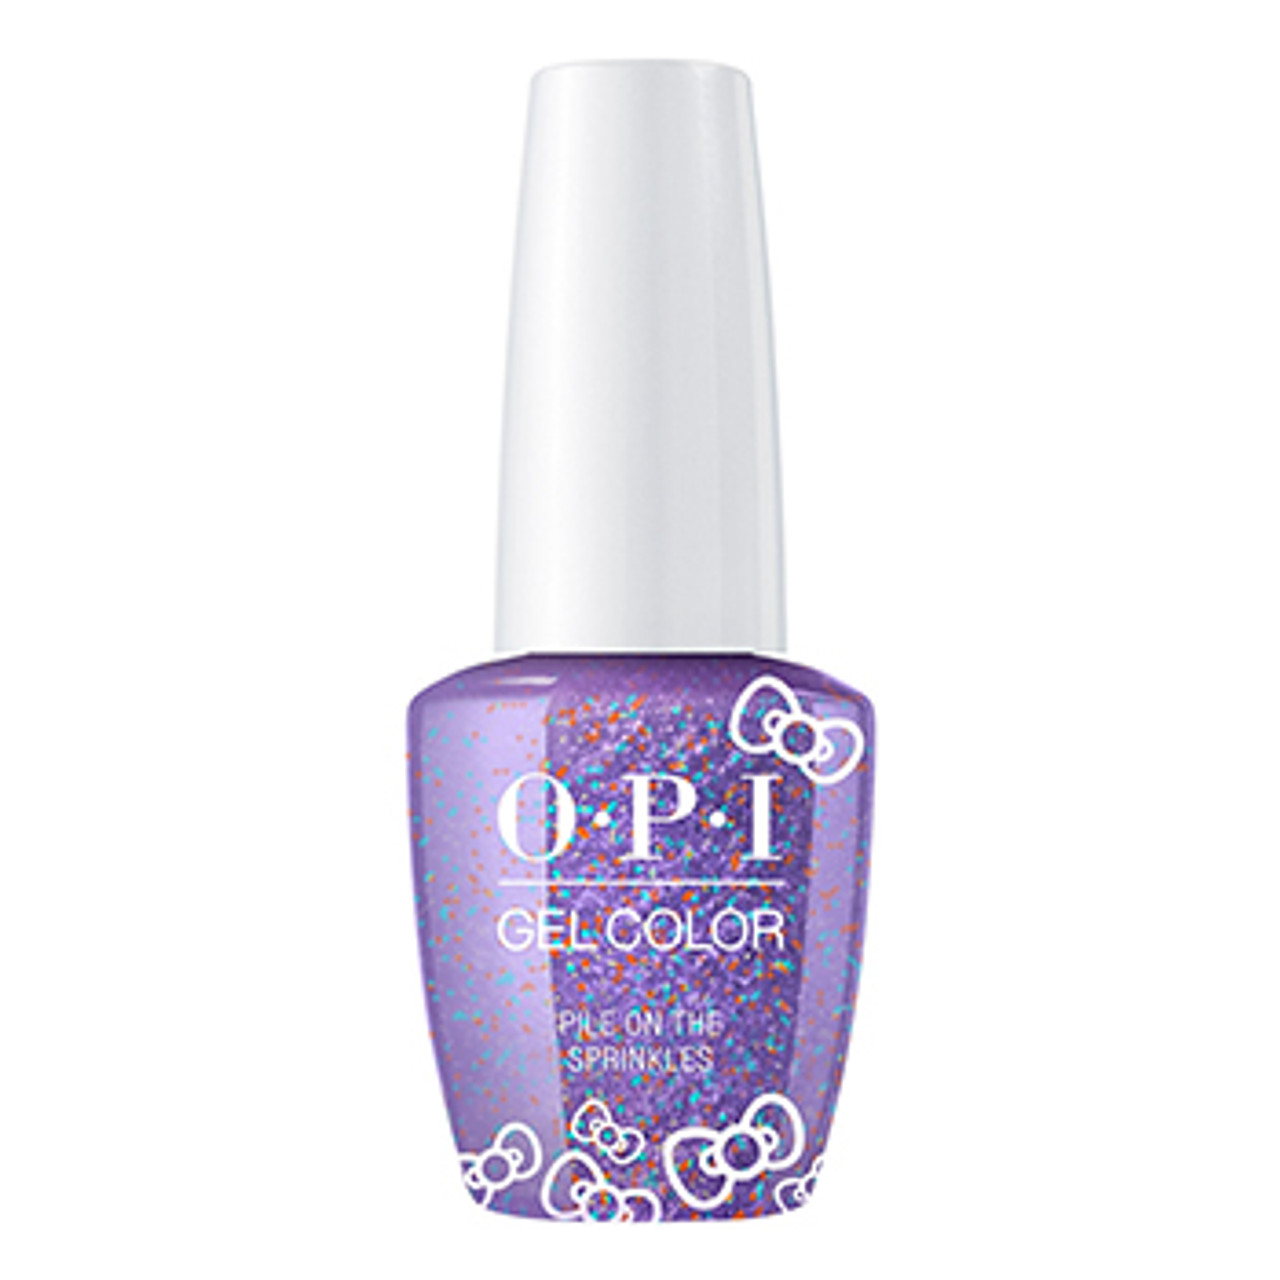 OPI GelColor Pile on the Sprinkles - .5 Oz / 15 mL